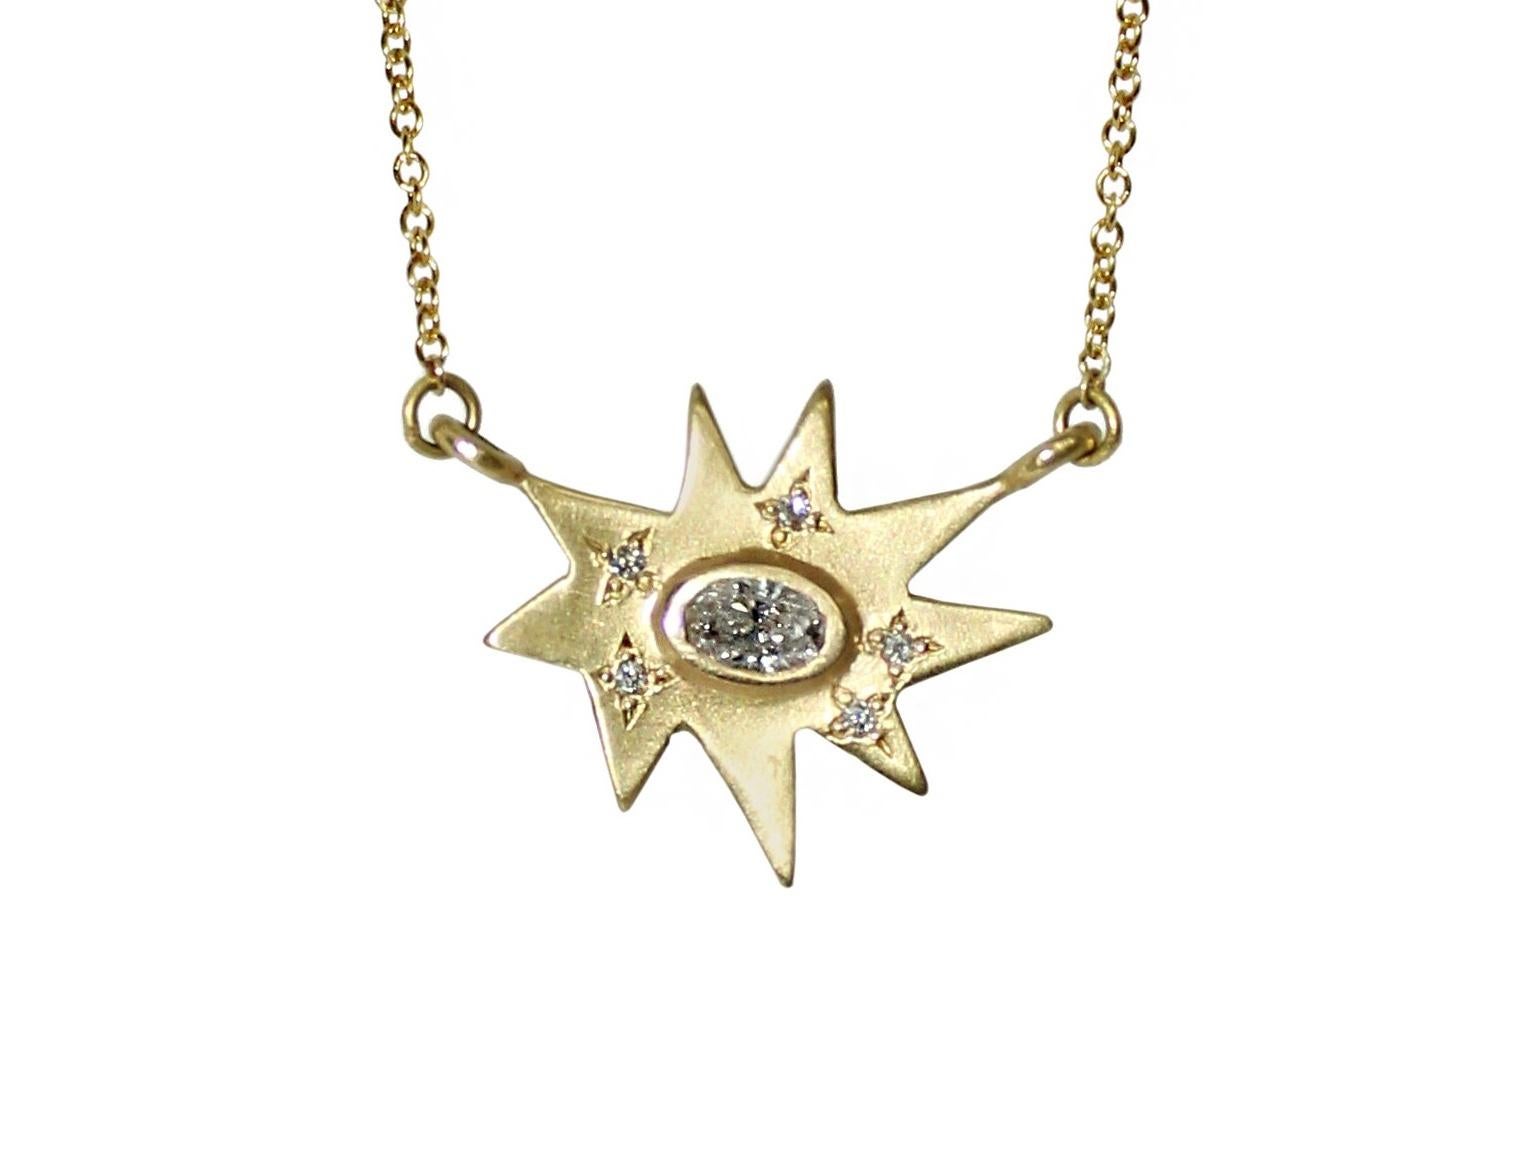 Add a little sparkle! Classic, contemporary and stunning. Our iconic matte yellow gold organic star shape Stellina necklace features our signature diamond dusting and a stunning 0.25 cttw diamond center. Hanging on a delicate gold chain, this piece